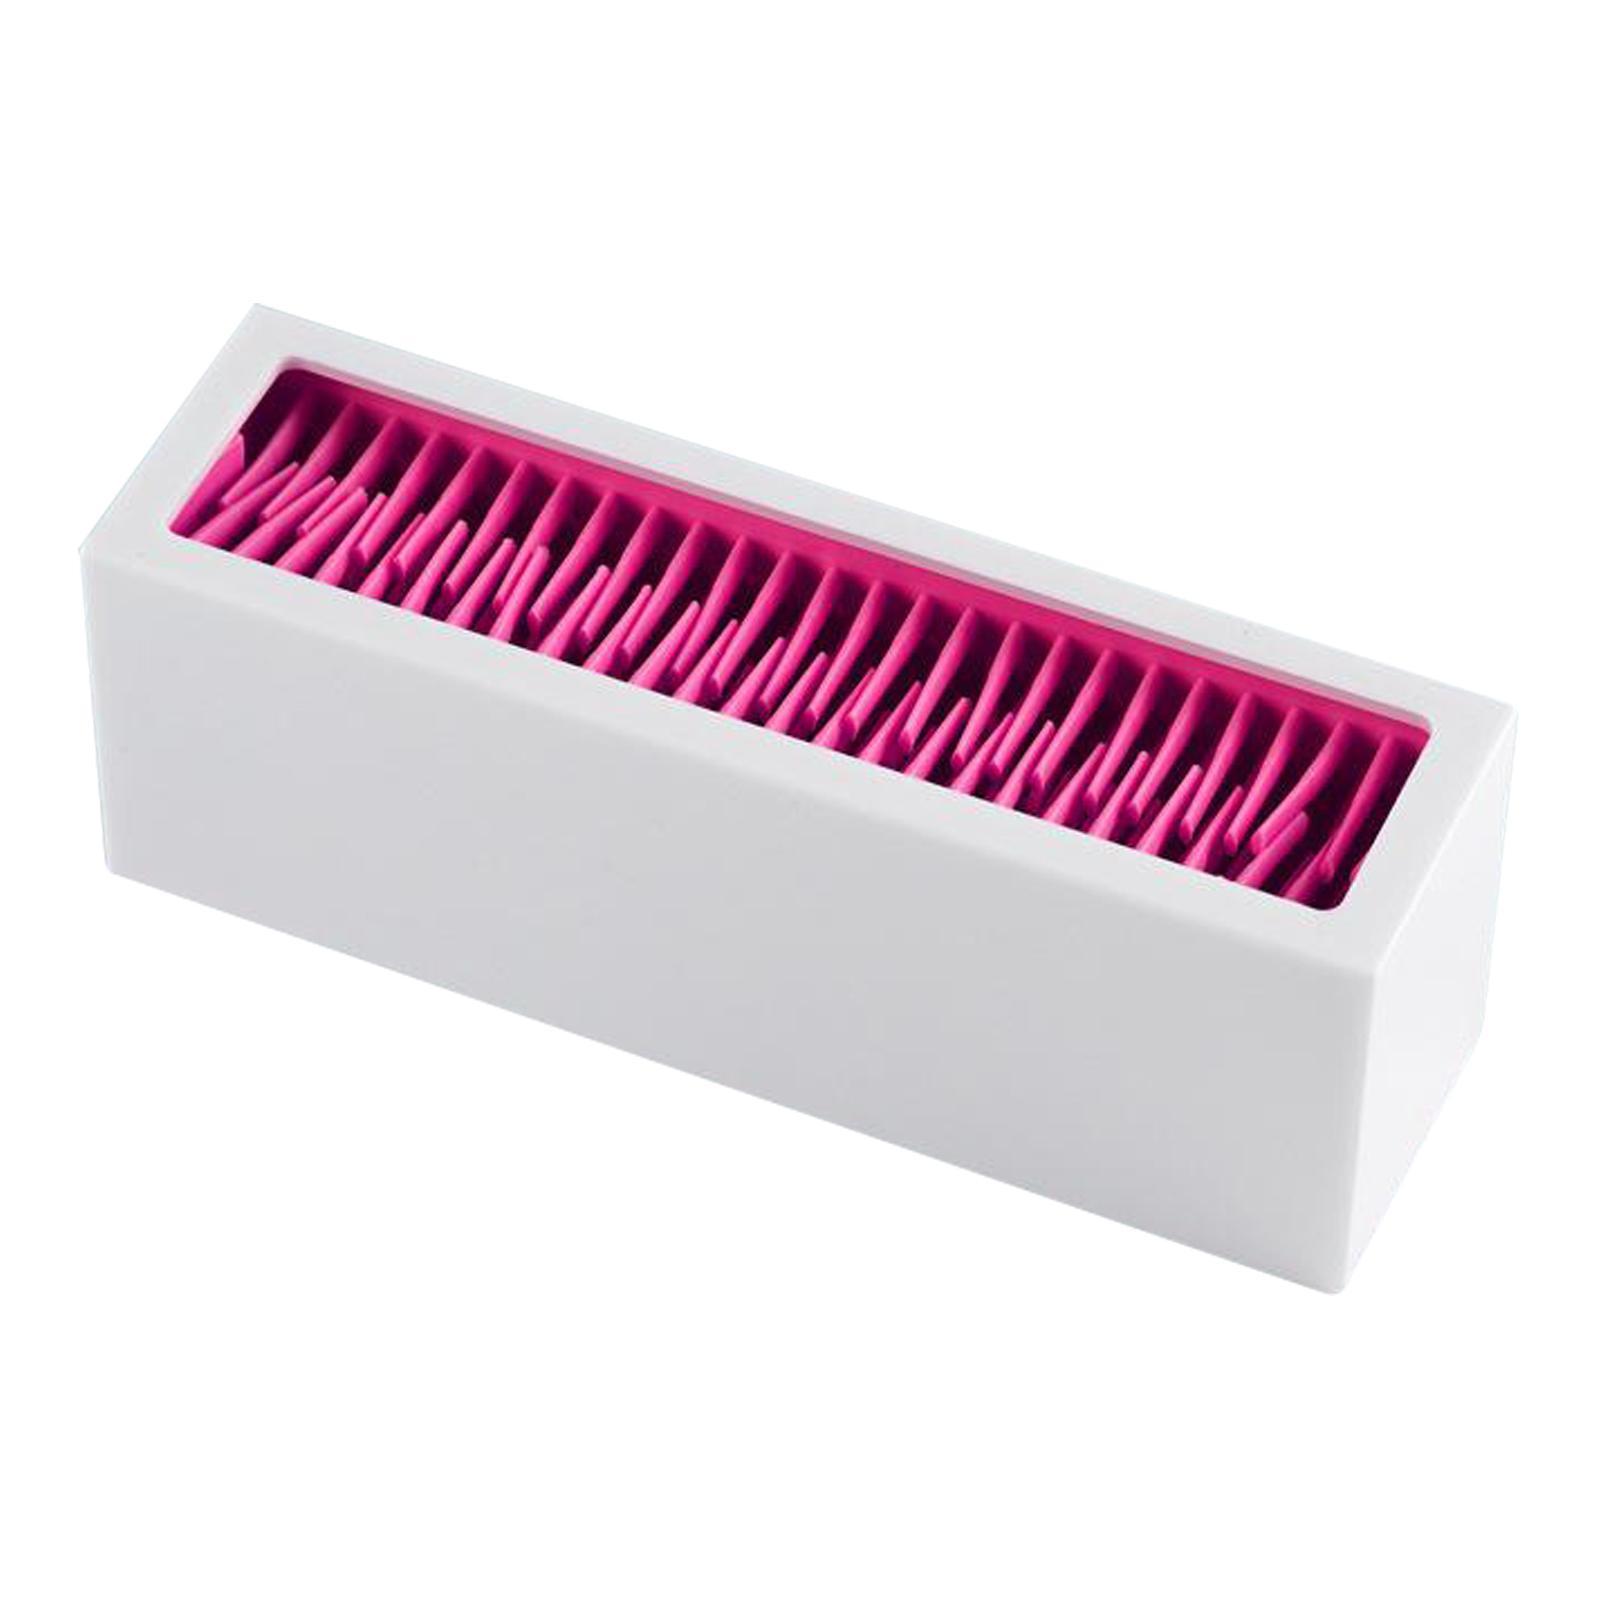 Makeup Brushes Holder Silicone Storage Rack for Cosmetic Tools